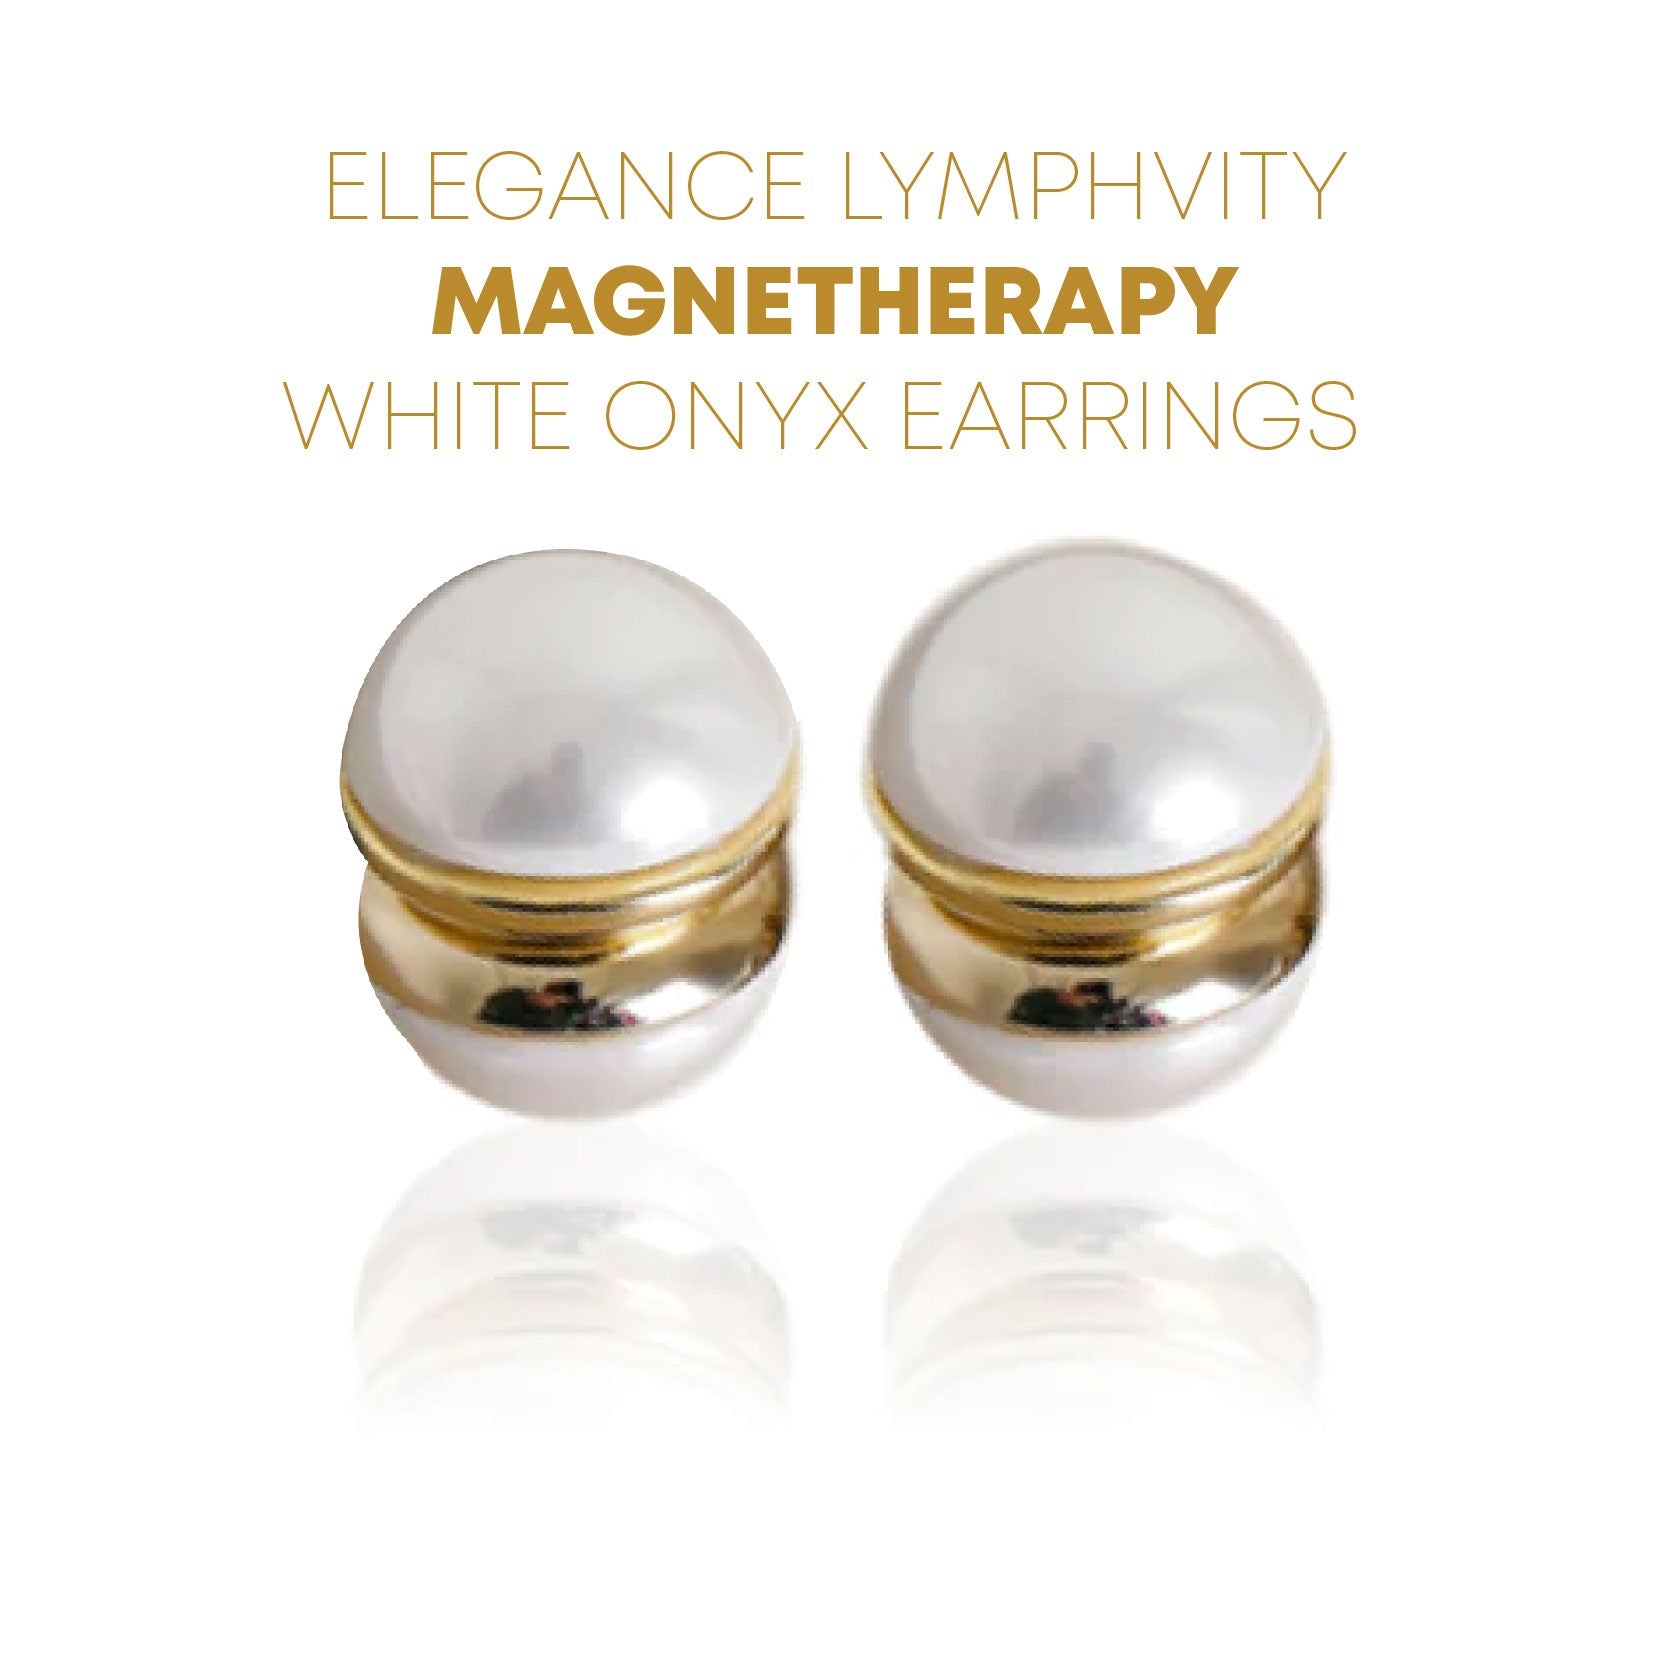 Elegance Lymphvity MagneTherapy White Onyx Earrings（Limited time discount 🔥 last day）